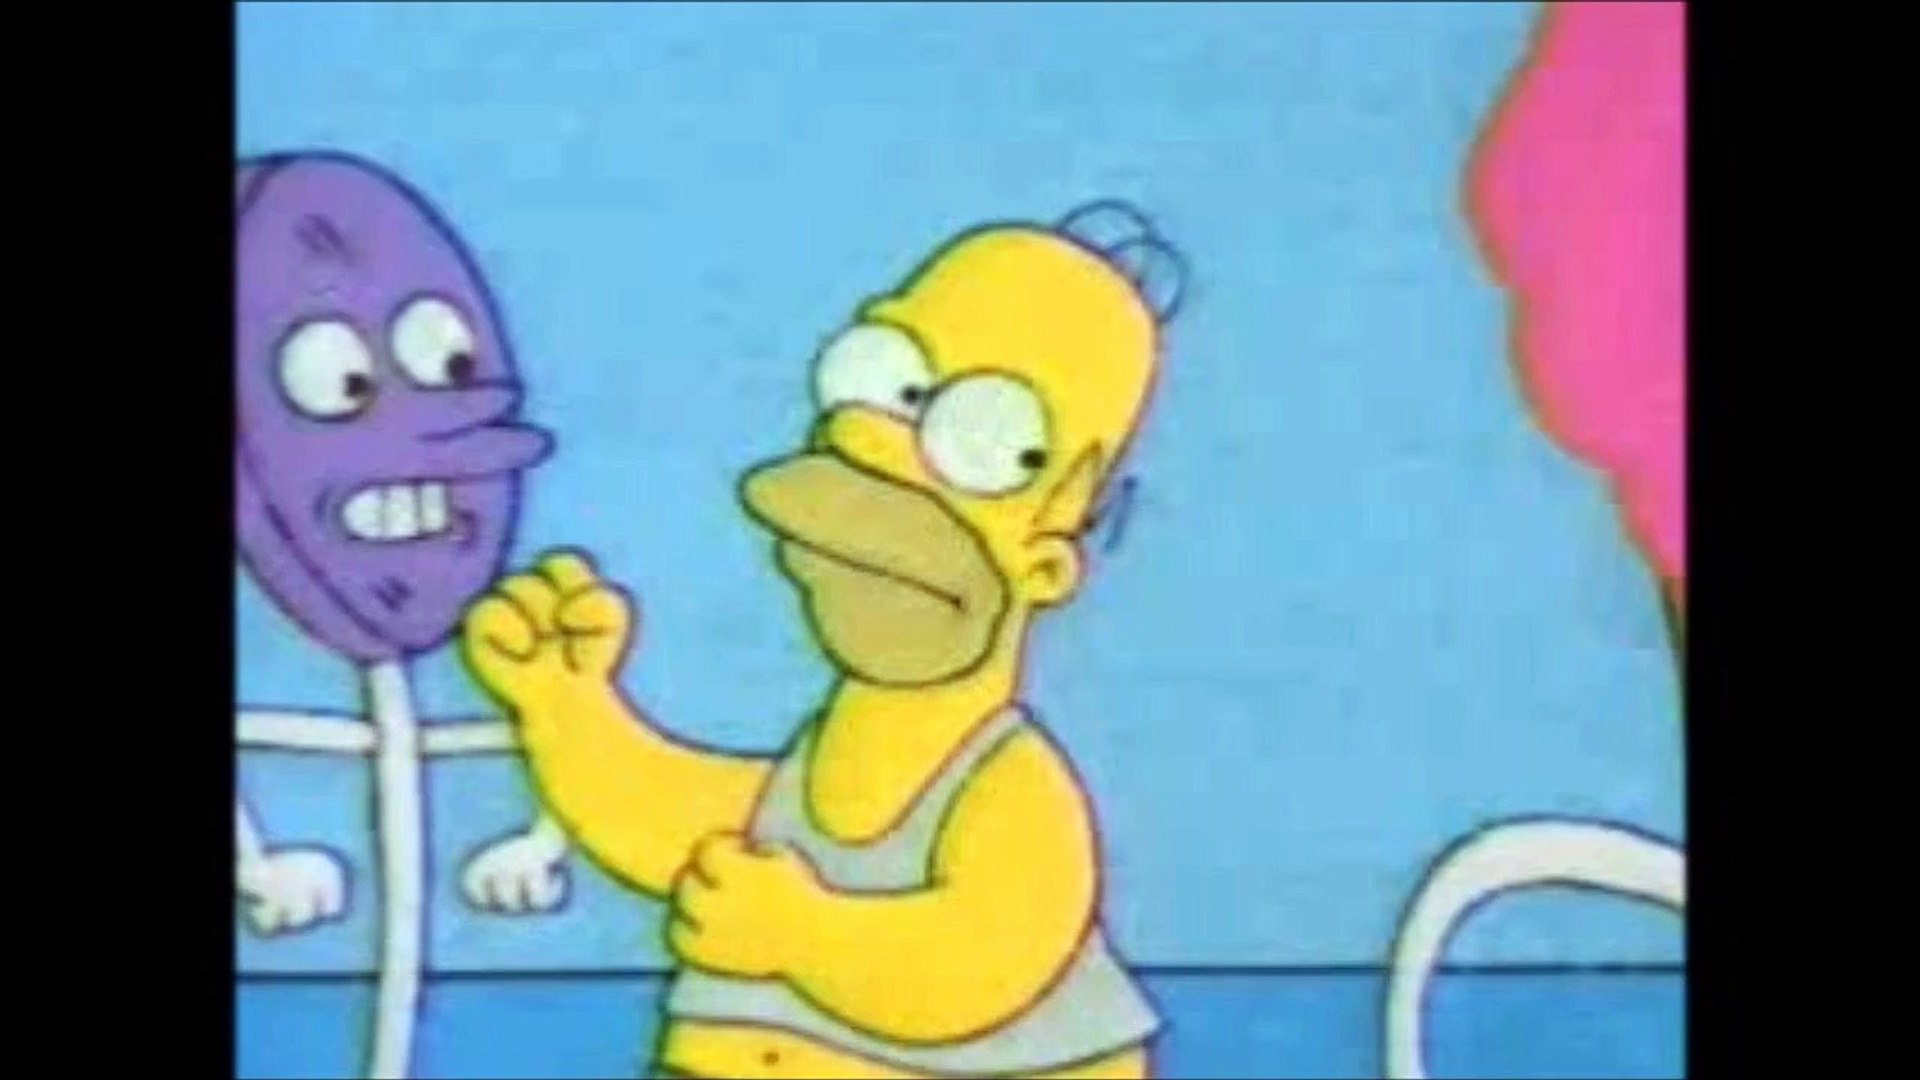 The Simpsons Best Moments Of Homer Simpson - video Dailymotion